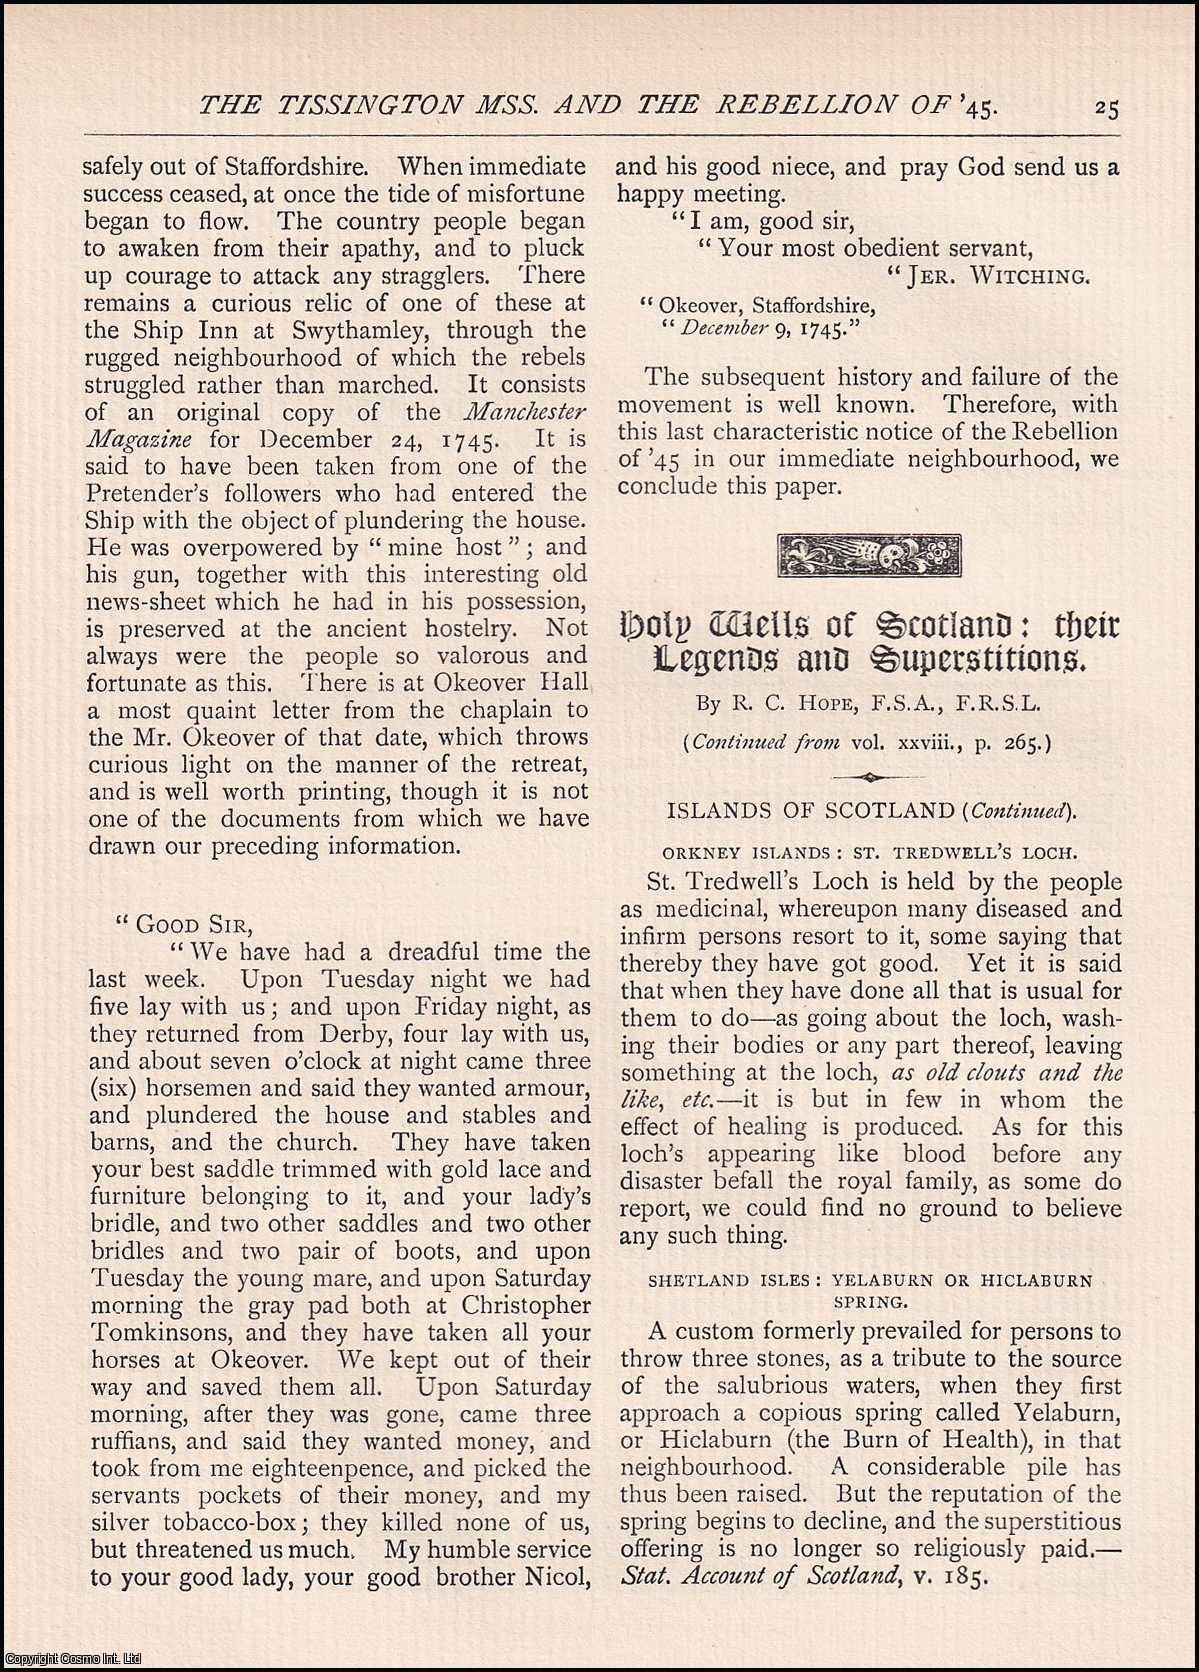 R. M. Grier - The Tissington Mss and The Rebellion of 45. An original article from The Antiquary Magazine, 1894.